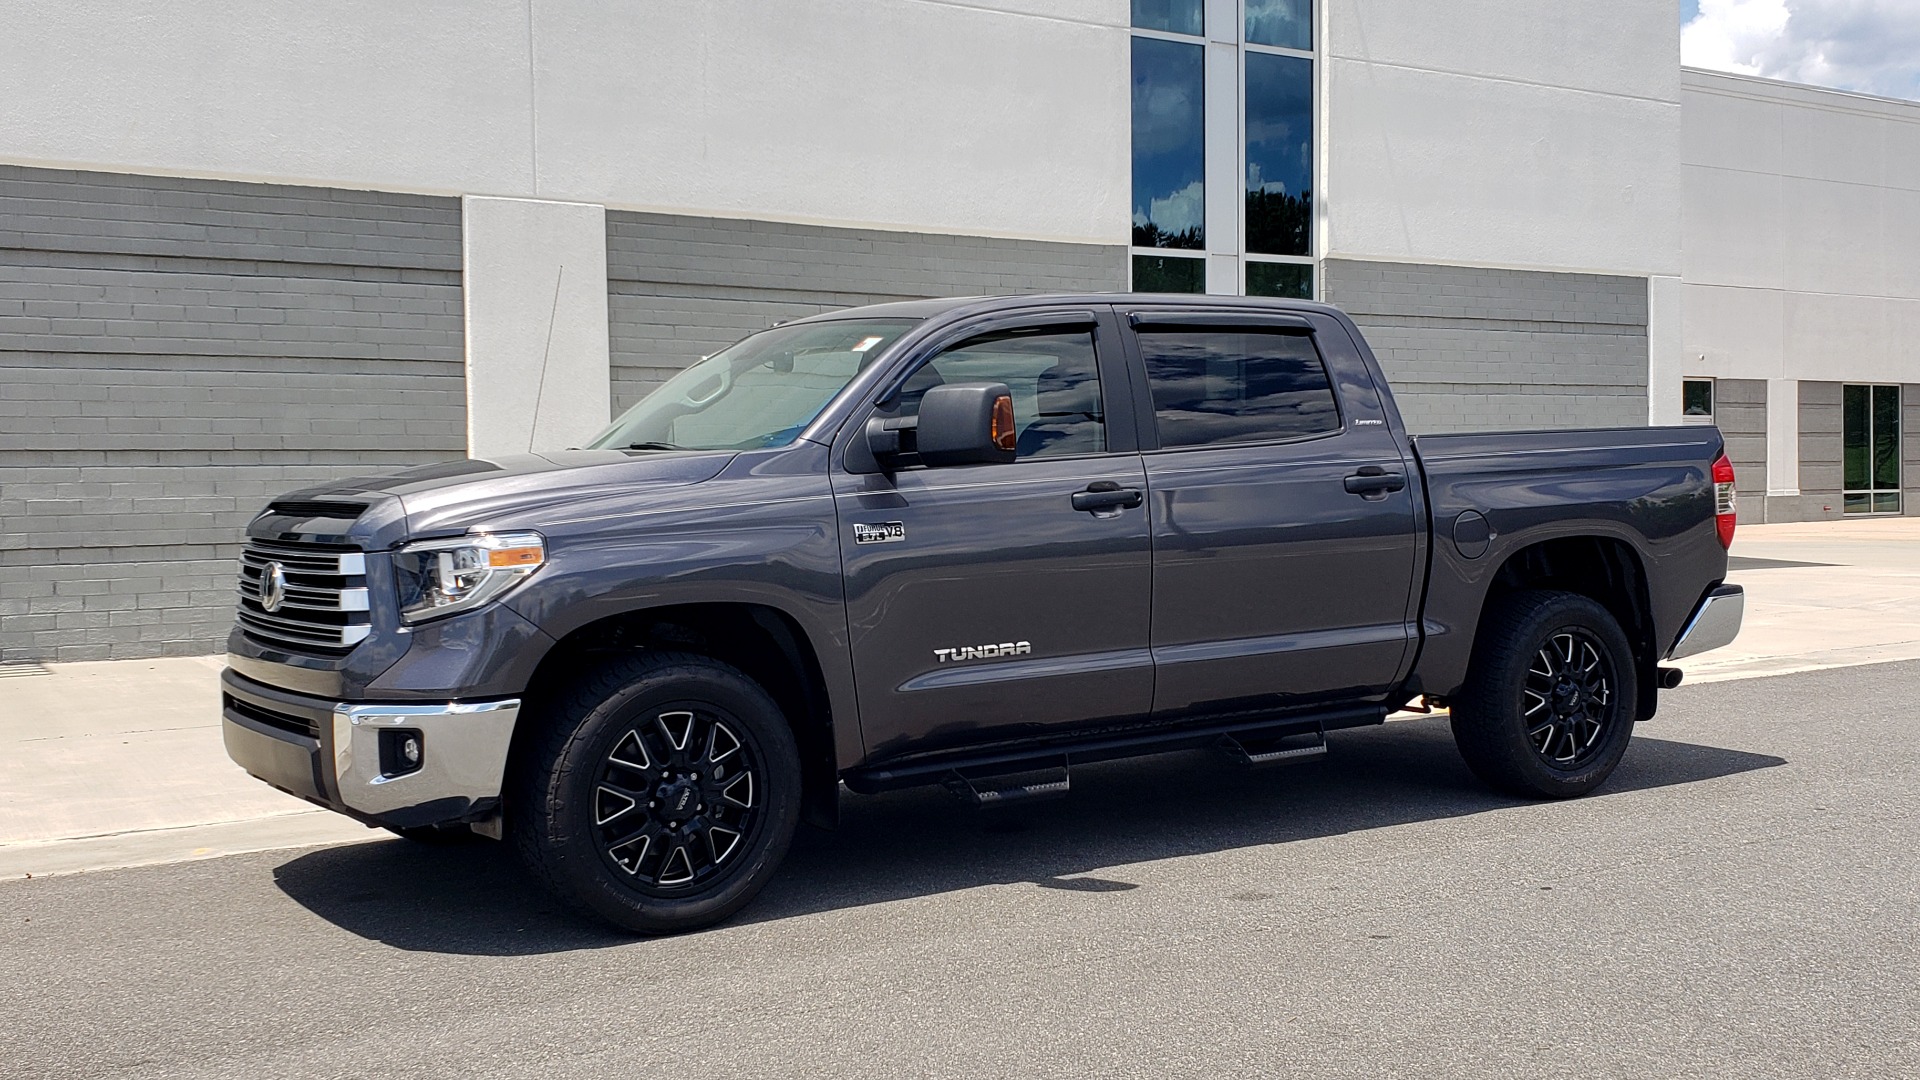 Used 2019 Toyota TUNDRA 4WD LIMITED / 5.7L V8 / 6-SPD AUTO / NAV / SUNROOF / REARVIEW for sale Sold at Formula Imports in Charlotte NC 28227 4